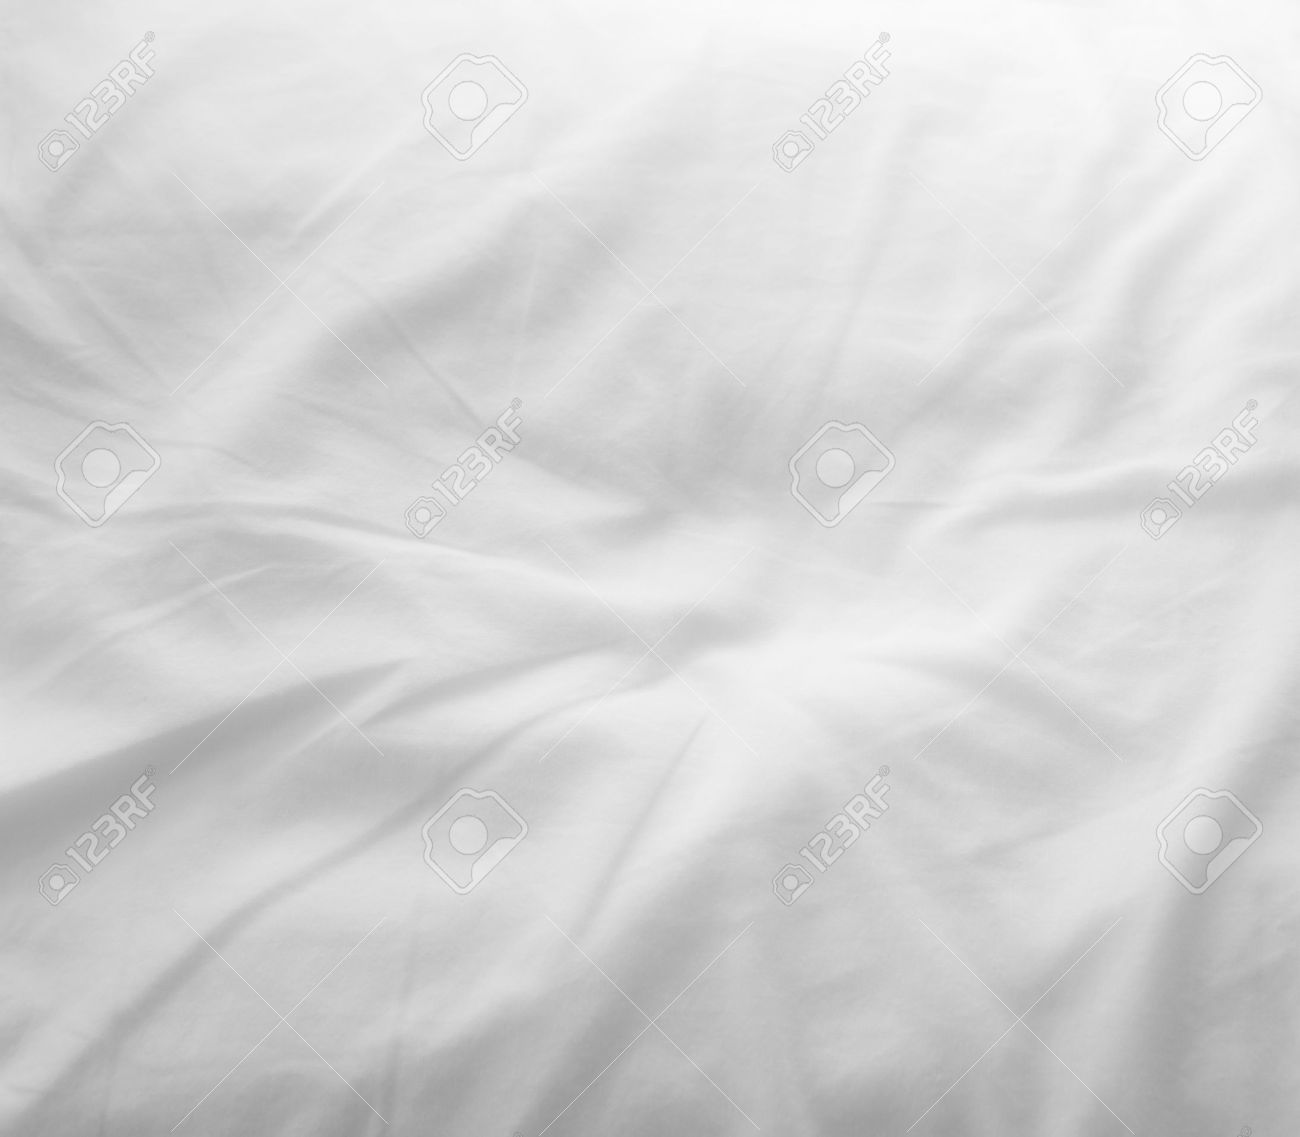 Soft White Bed Sheets Background Stock Photo Picture And Royalty